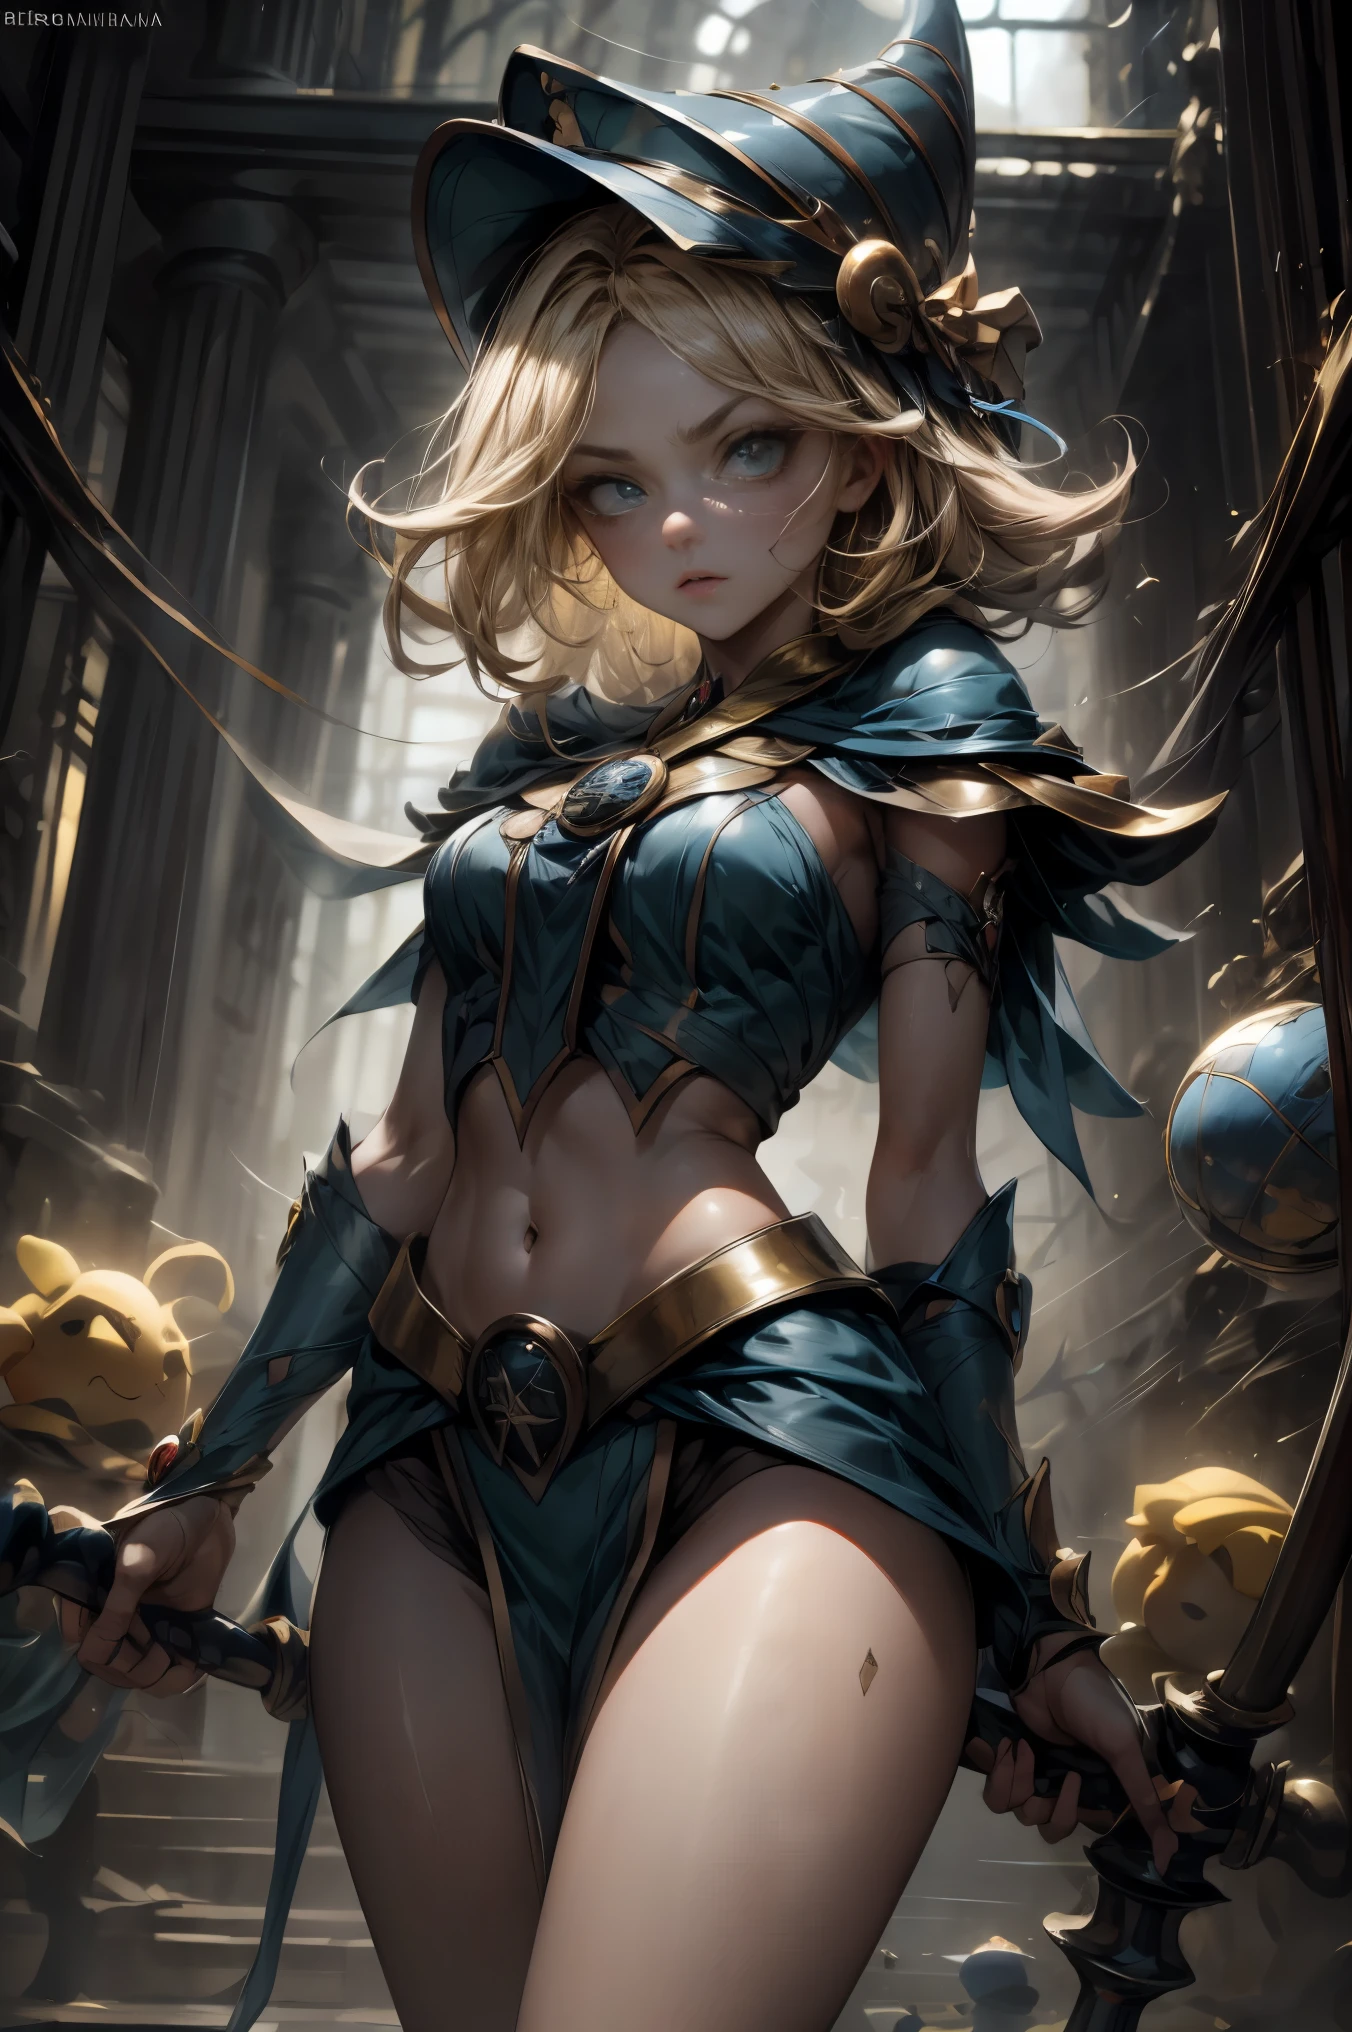 (8k,photorealistic　Raw photography　highest qualityr;1.4) 　(1girl in)　super beauty　(realistic face)　femenine body 　(Blonde with long curls)　Hold a black and red magic wand　combat scene　Magic hat with black and gold exterior　Beautiful expression　Glare　(Real looking skin)　(Giles dark wizards)　tempting　超A high resolution　A hyperrealist　High detail　Full body photo　remains